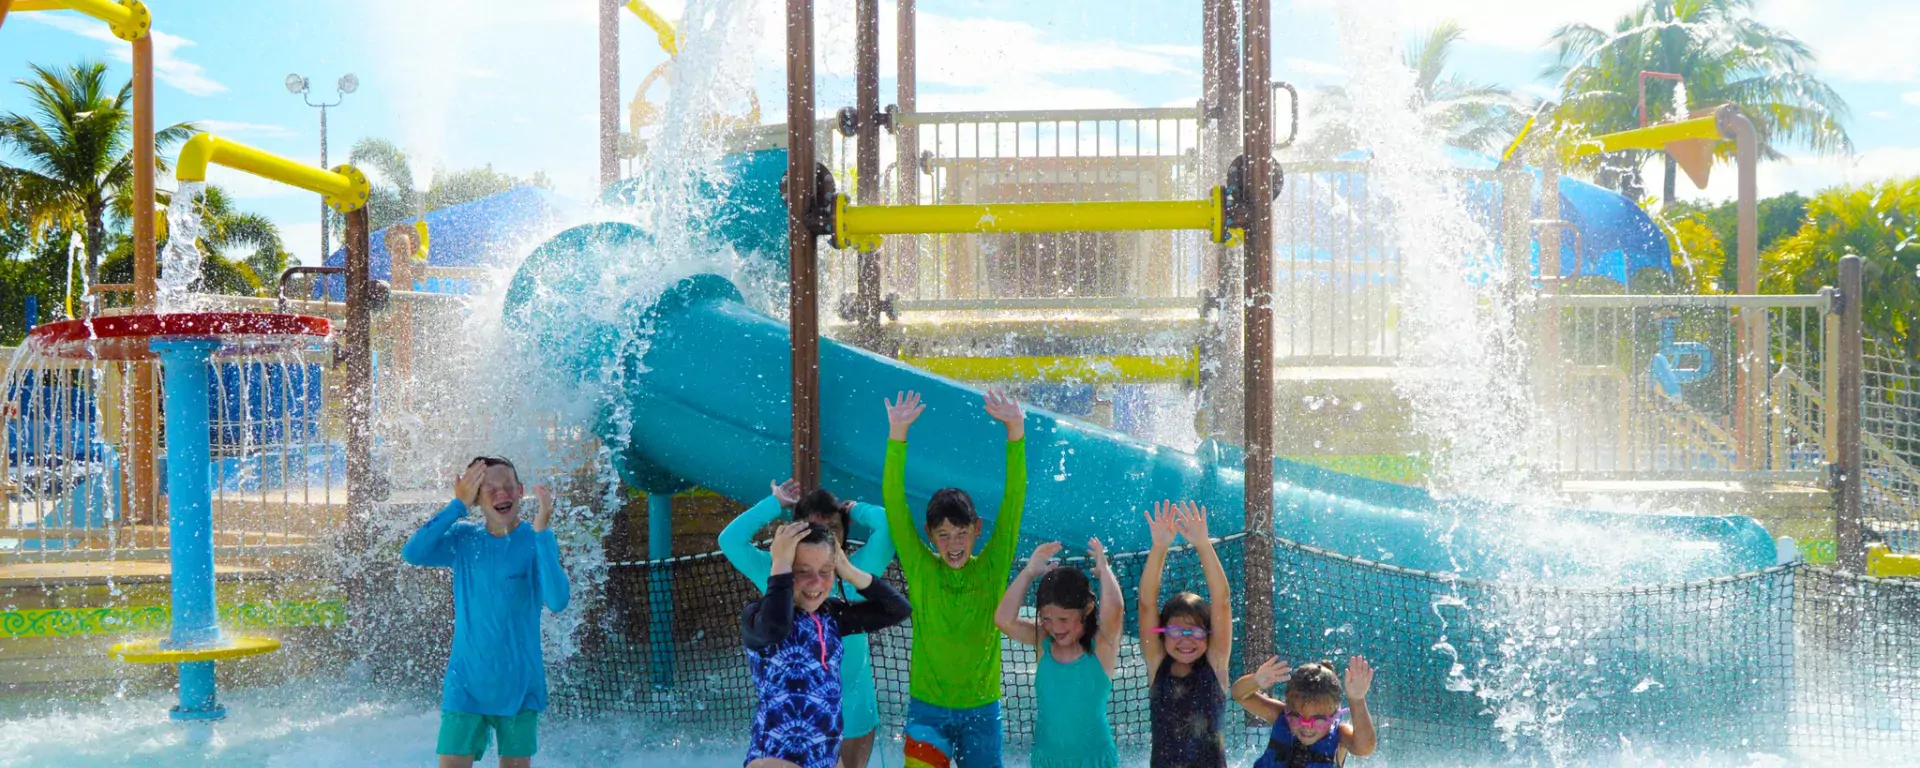 Image of a group of children laughing at the splash playground at Sailfish Splash Waterpark in Stuart, FL.